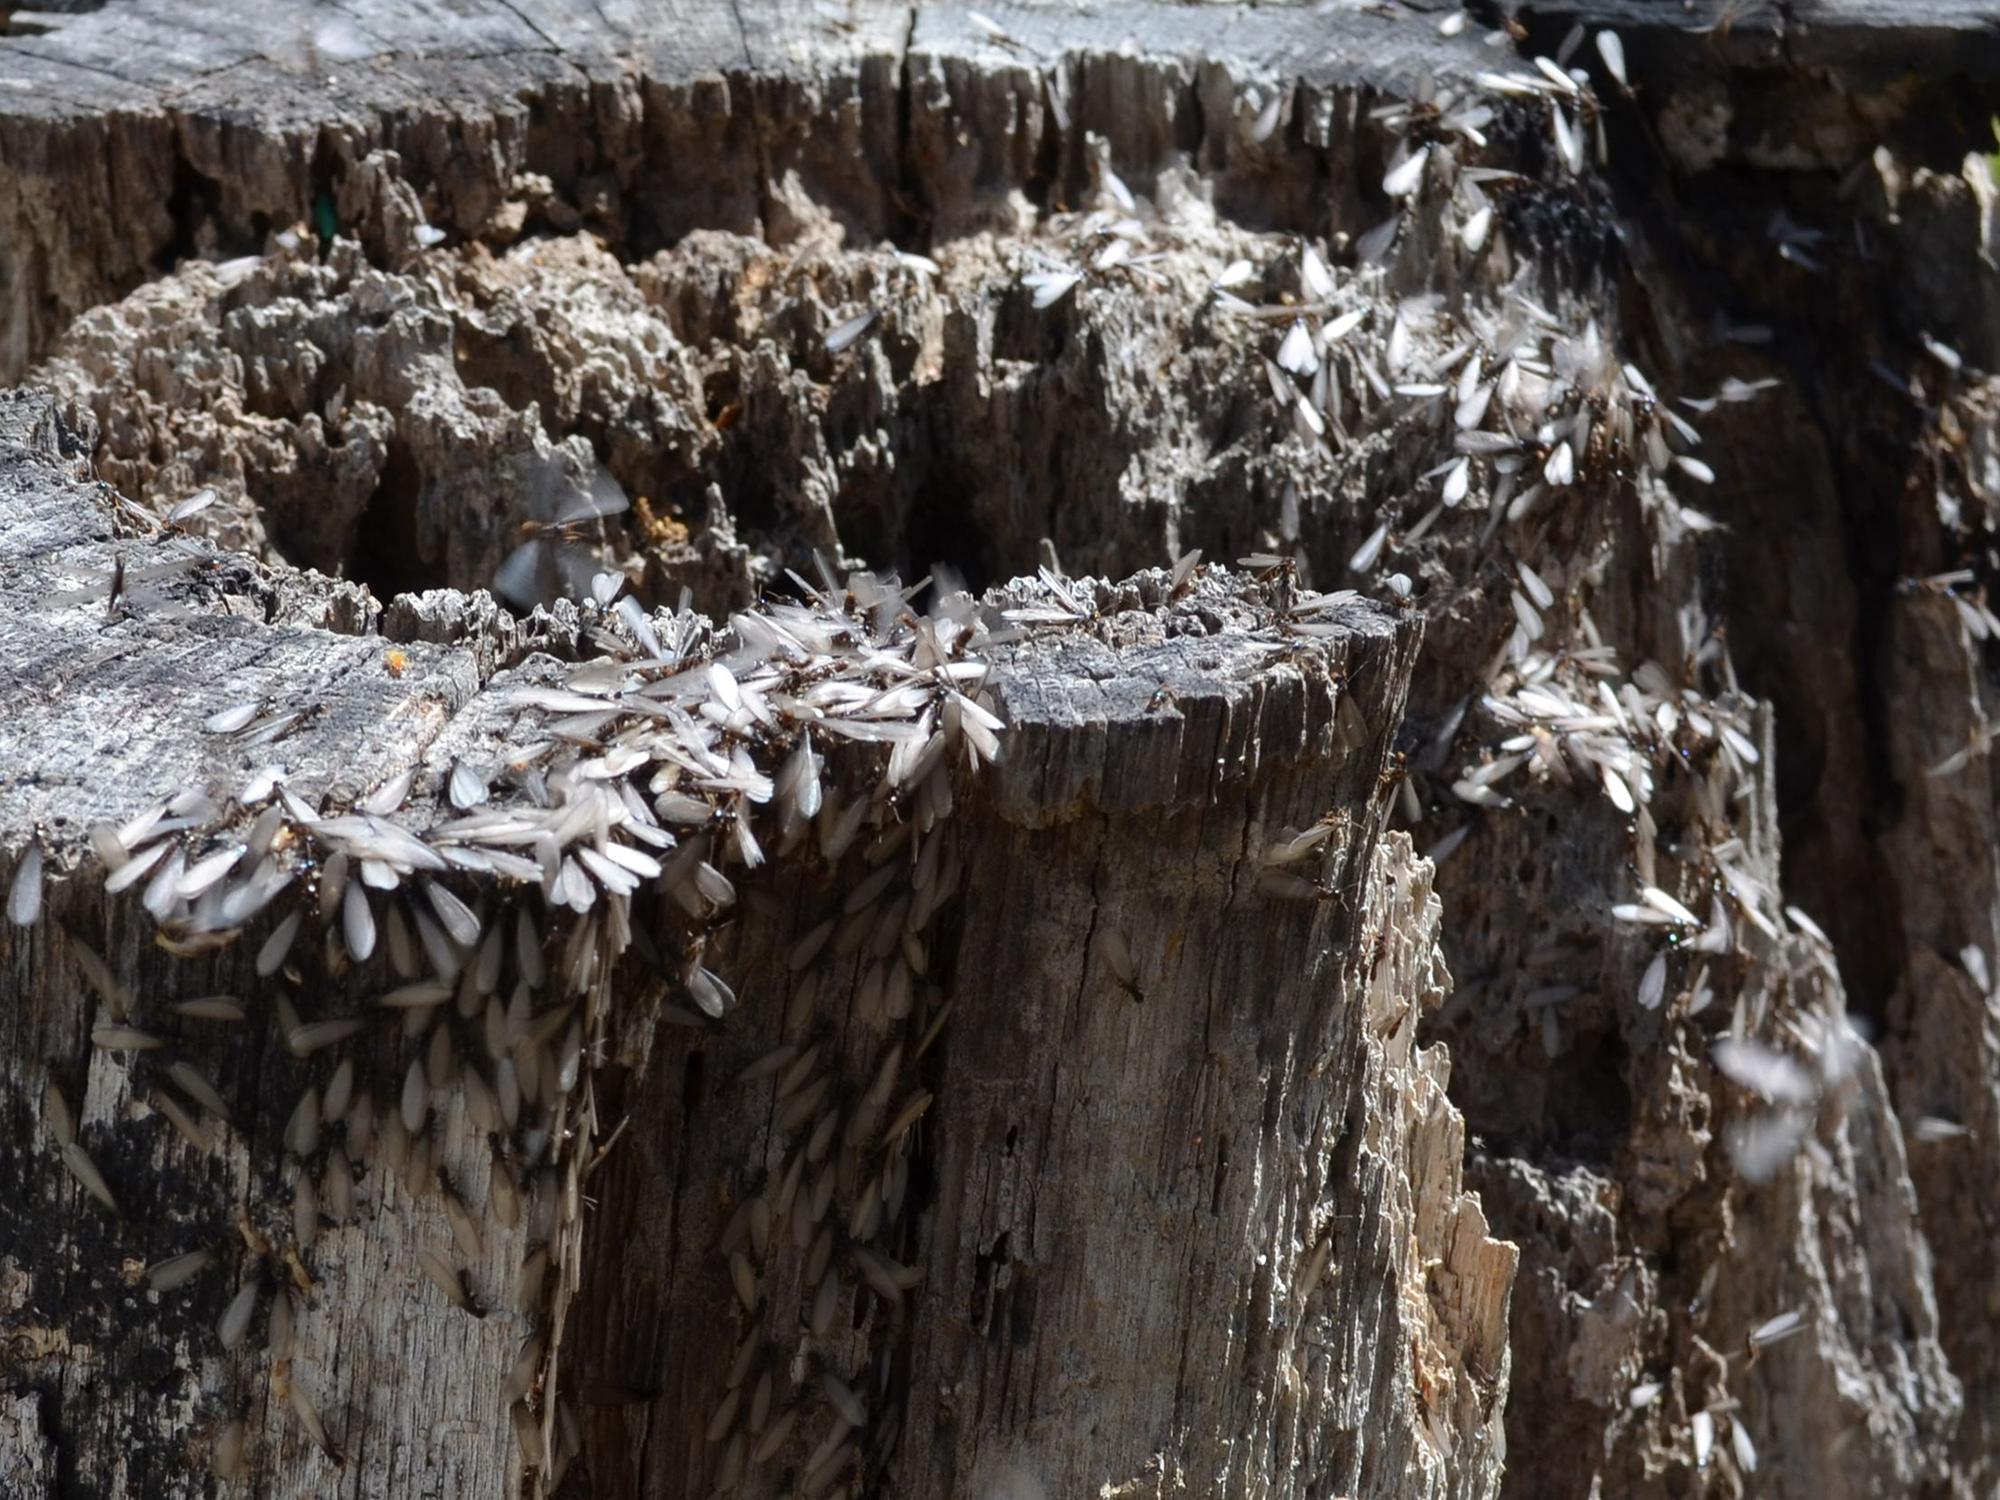 Termites swarming on this decaying tree stump are a healthy part of nature, but homeowners must take steps to make sure they do not infest houses. (Photo by MSU Extension Service/Linda Breazeale)